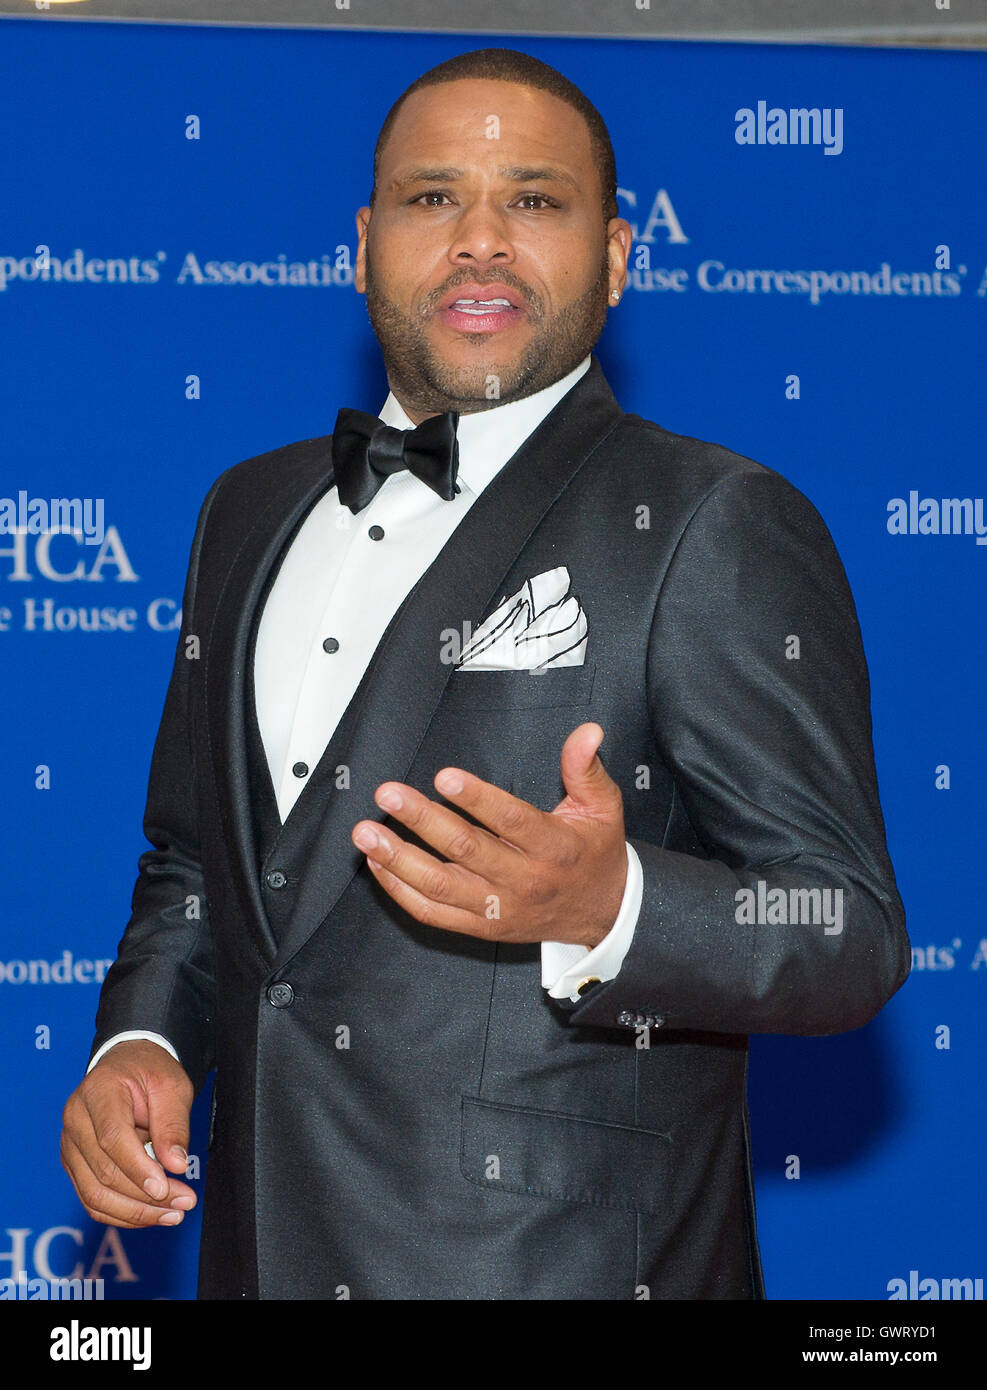 Anthony Anderson arrives for the 2015 White House Correspondents Association Annual Dinner at the Washington Hilton Hotel on Saturday, April 25, 2015. Credit: Ron Sachs / CNP /MediaPunch Stock Photo